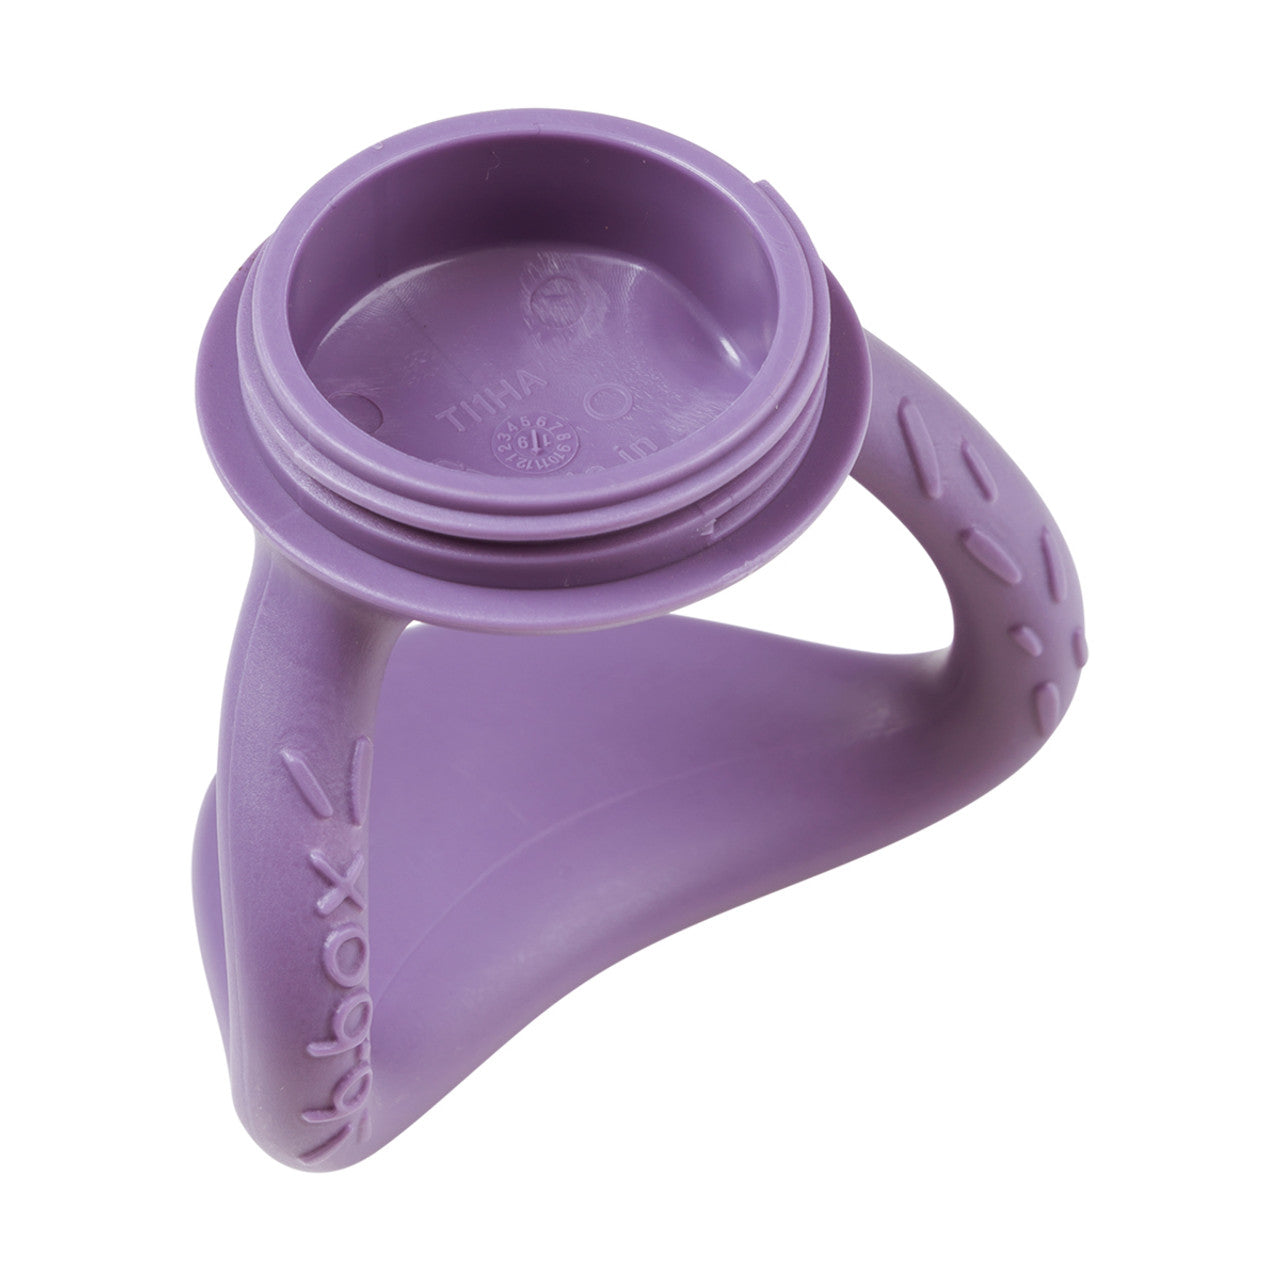 b.box Chill + Fill Silicone Teether available at Bear & Moo